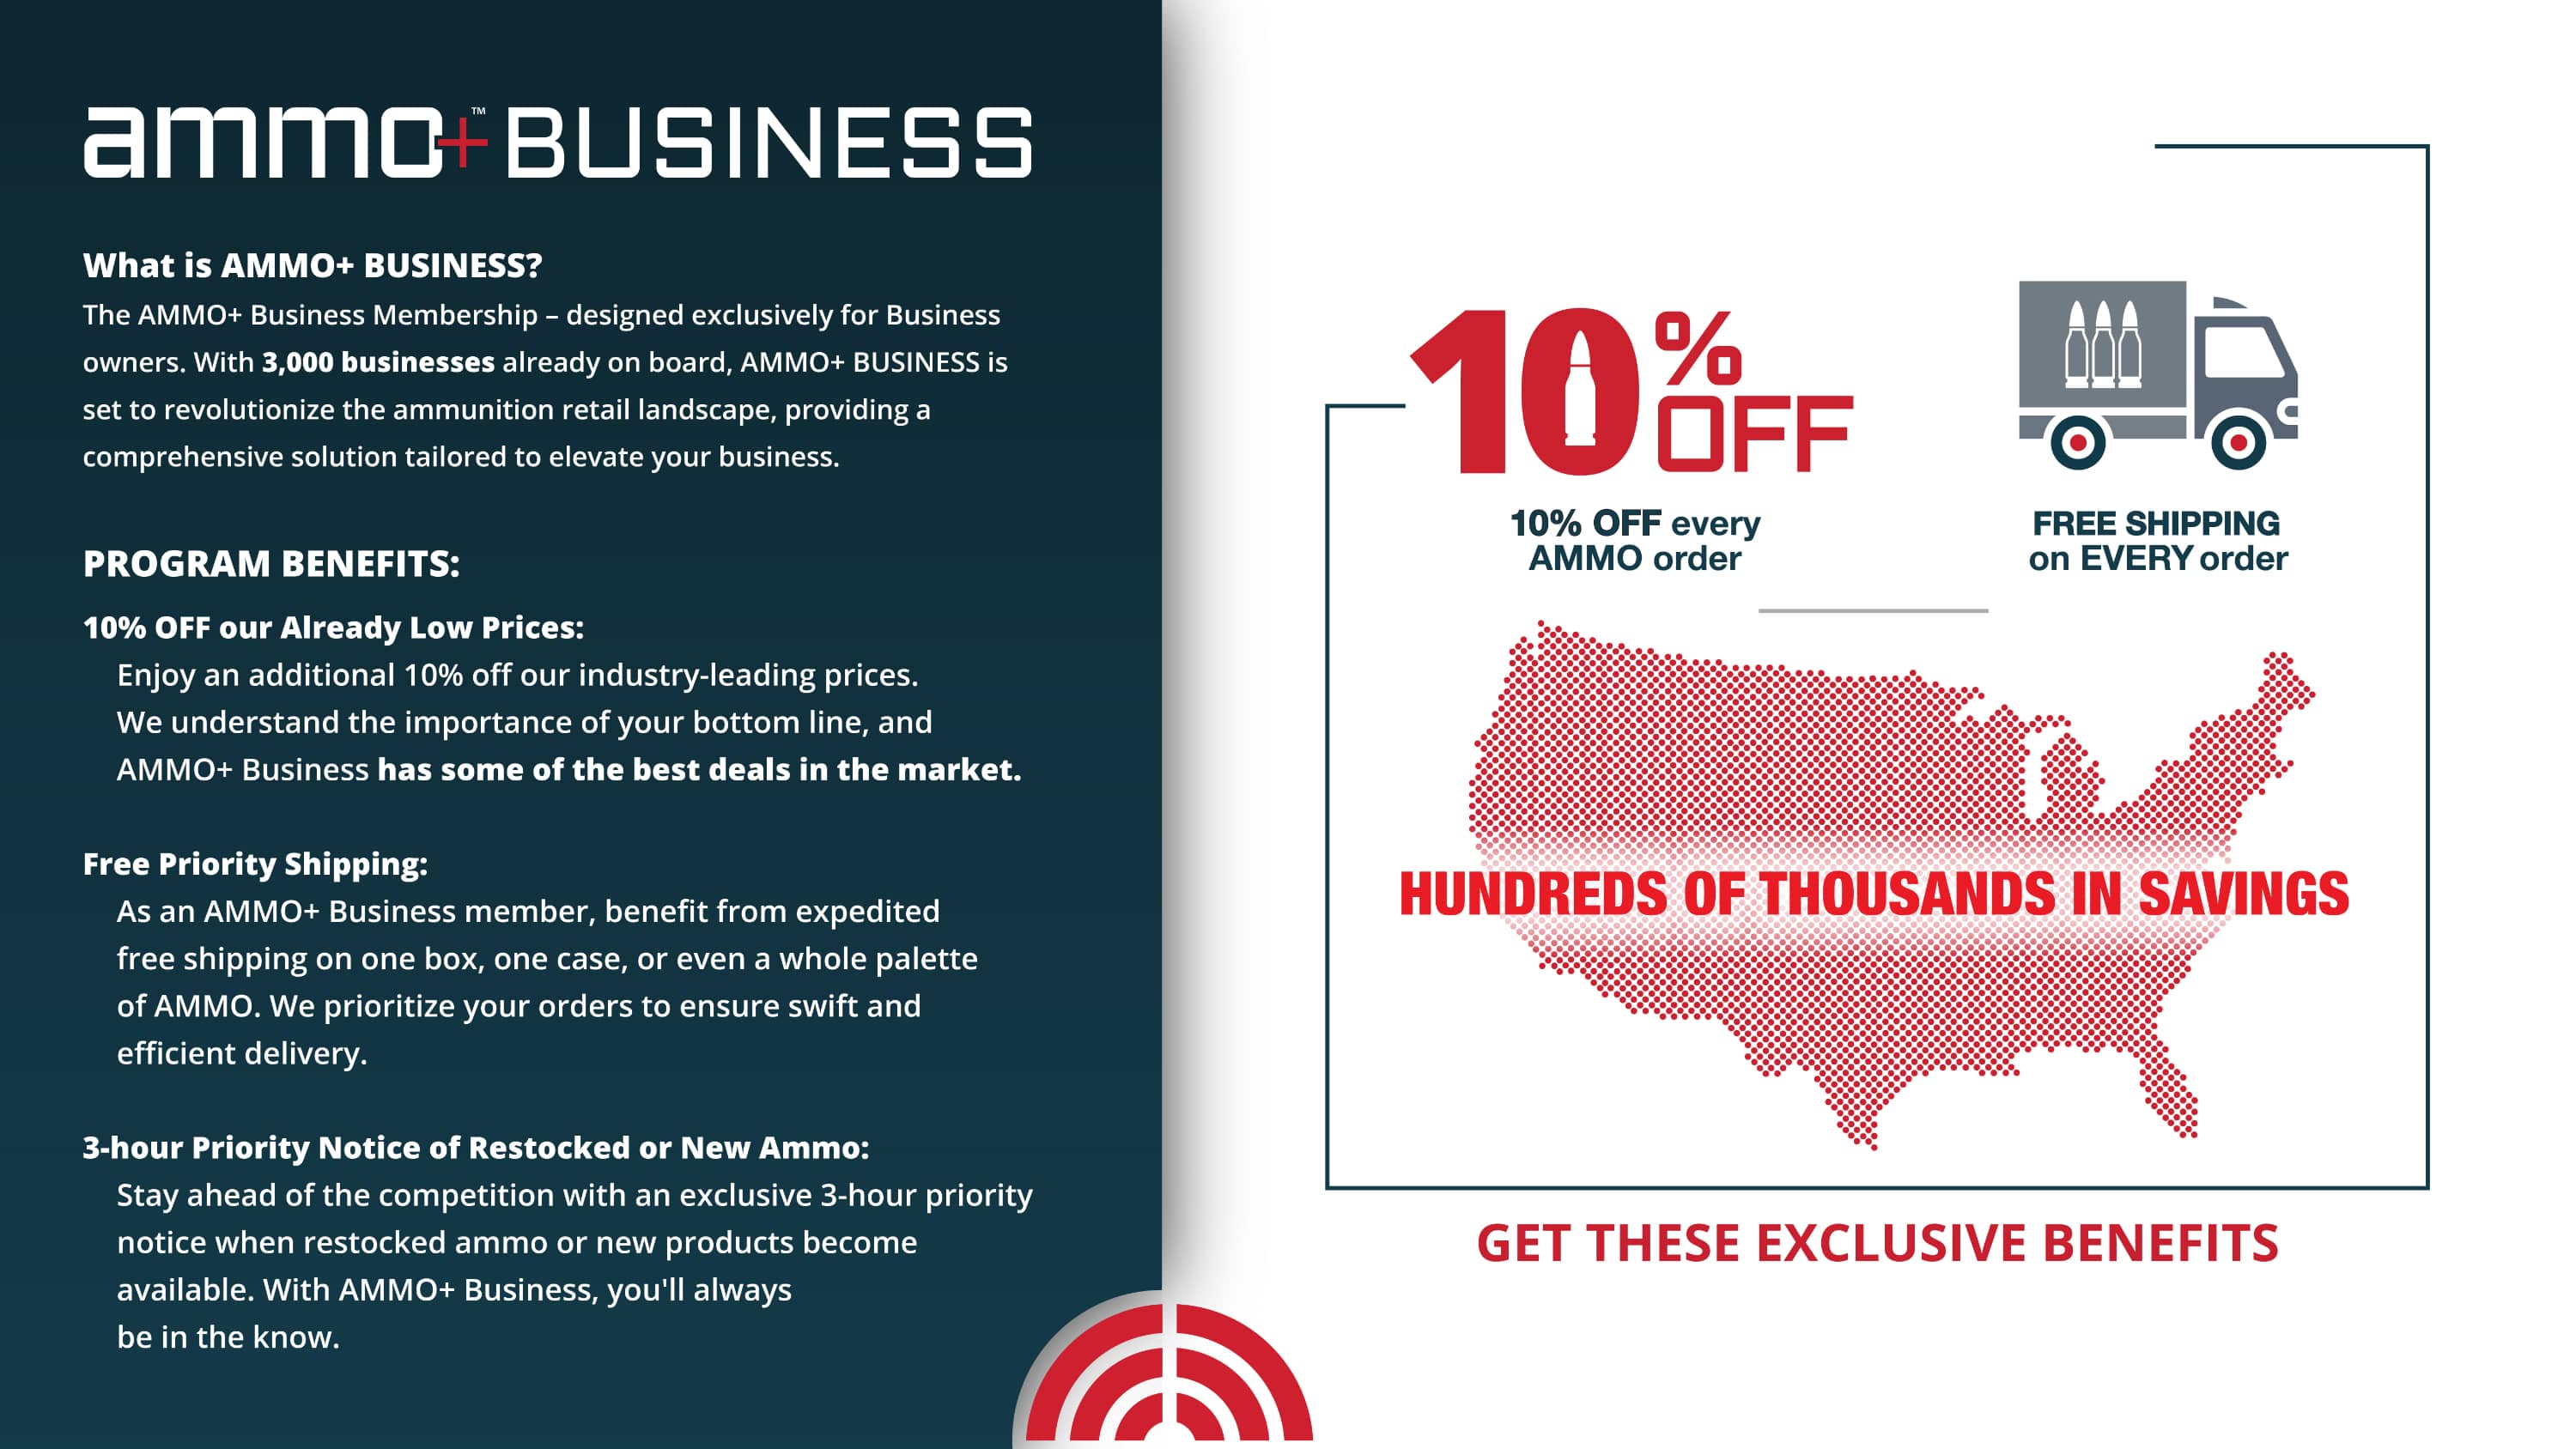 The Ammo Plus Business Membership - designed exclusively for business owners. With 3,000 businesses already on board, Ammo Plus Business is set to revolutionize the ammunition retail landscape, providing a comprehensive solution tailored to elevate your business. 10% OFF our already low prices on every ammo order, free priority shipping and 3-hour priority notice of restocked or new ammo. Get these exclusive benefits with Ammo Plus Business Membership